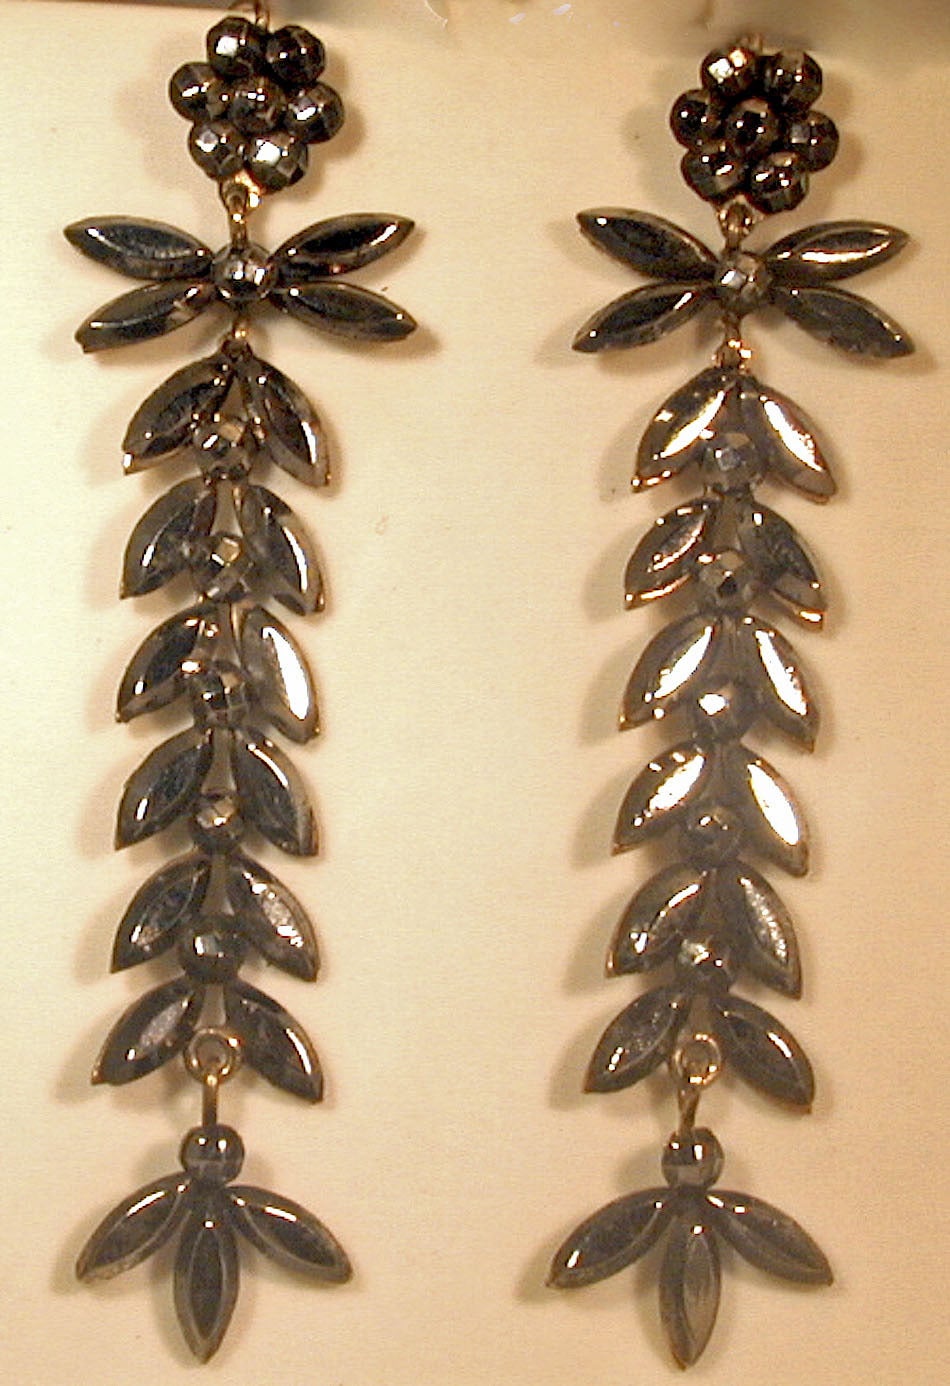 Victorian cut steel earrings of a foliate design with floral tops are wonderful to wear day or night. In its day cut steel Ijewelry was popular for evening wear as the faceted steel sparkled like diamonds in candlelight. The earrings measure 2 3/4